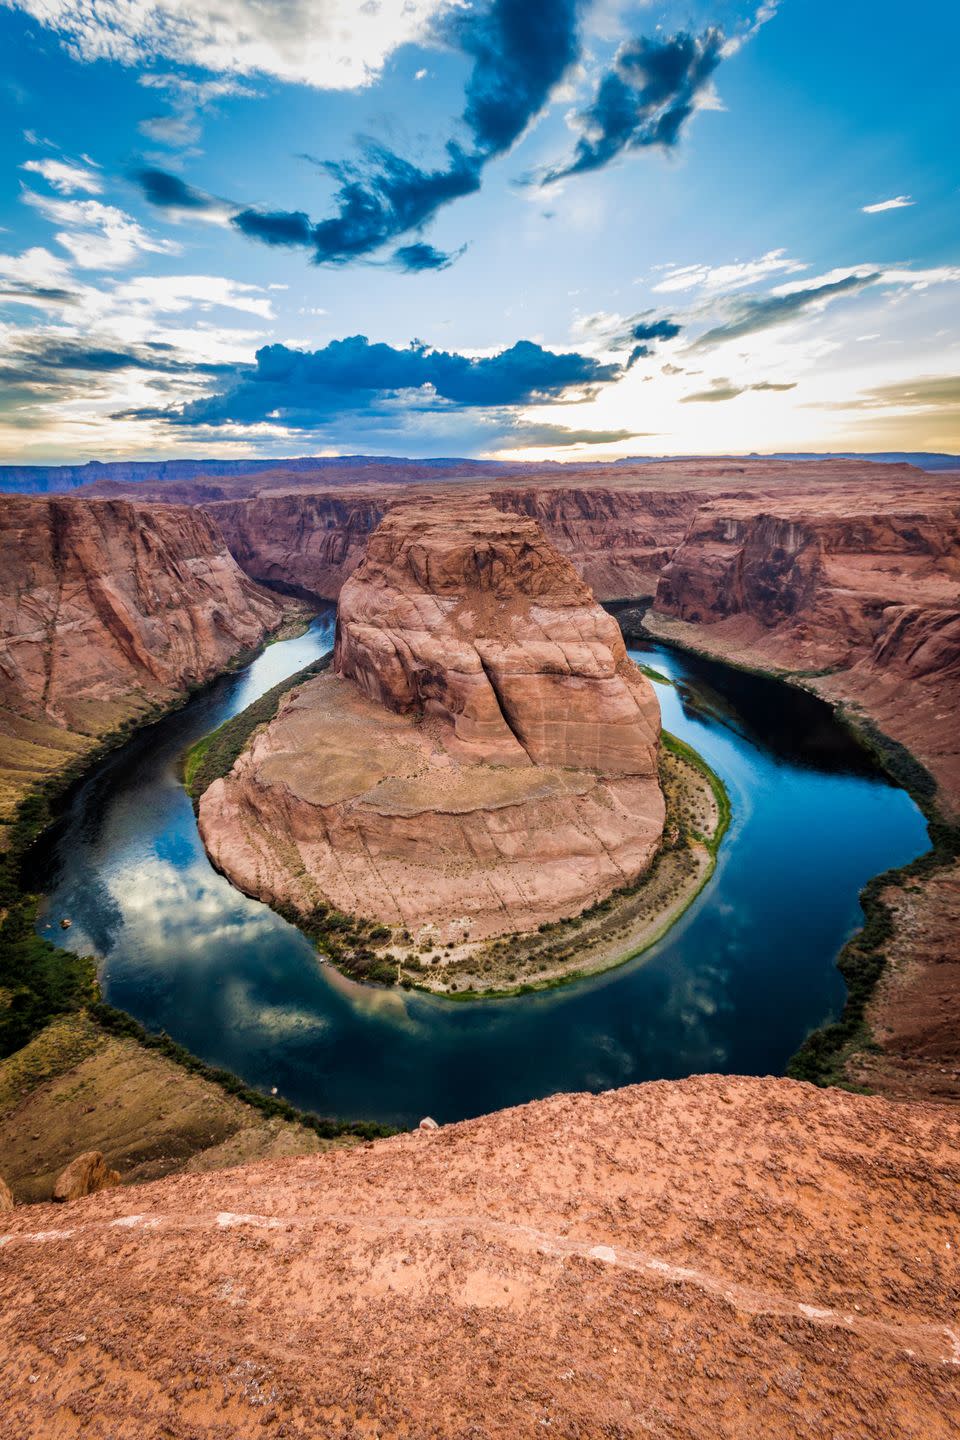 <p><strong>Where: </strong>Colorado River, Arizona</p><p><strong>Why We Love It: </strong>While the Colorado River flows all the way from the Rocky Mountains to Mexico, head to Horseshoe Bend near the border of Arizona and Utah for the most Instagrammable view.</p>